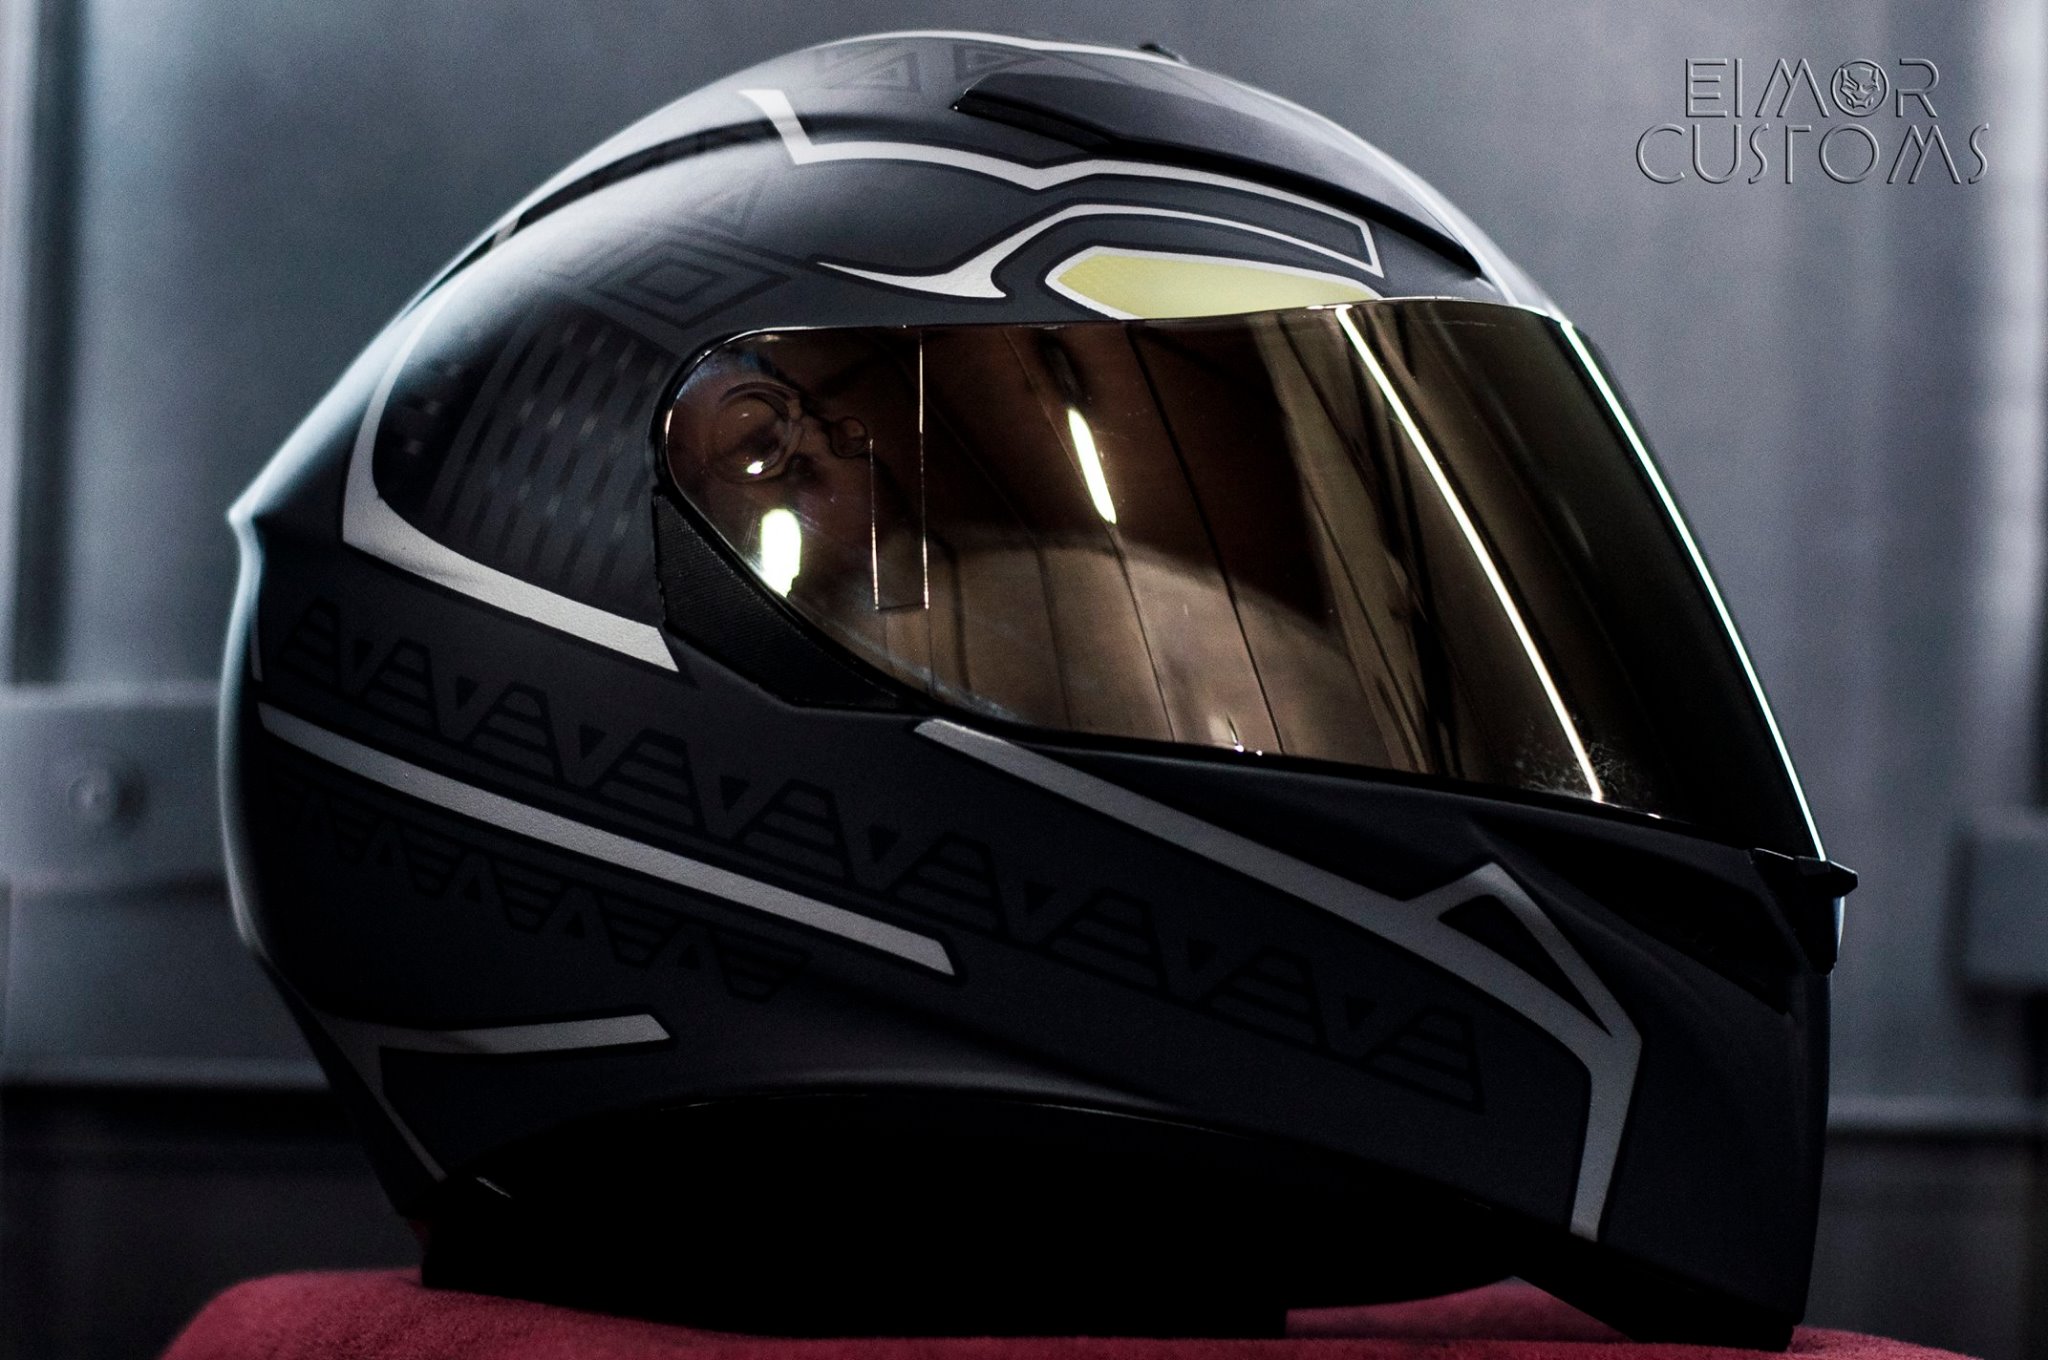 Top 10 Helmets by EIMOR - Black Panther, Breathe, The Lady Rider, Phantom, Captain America & More! - image